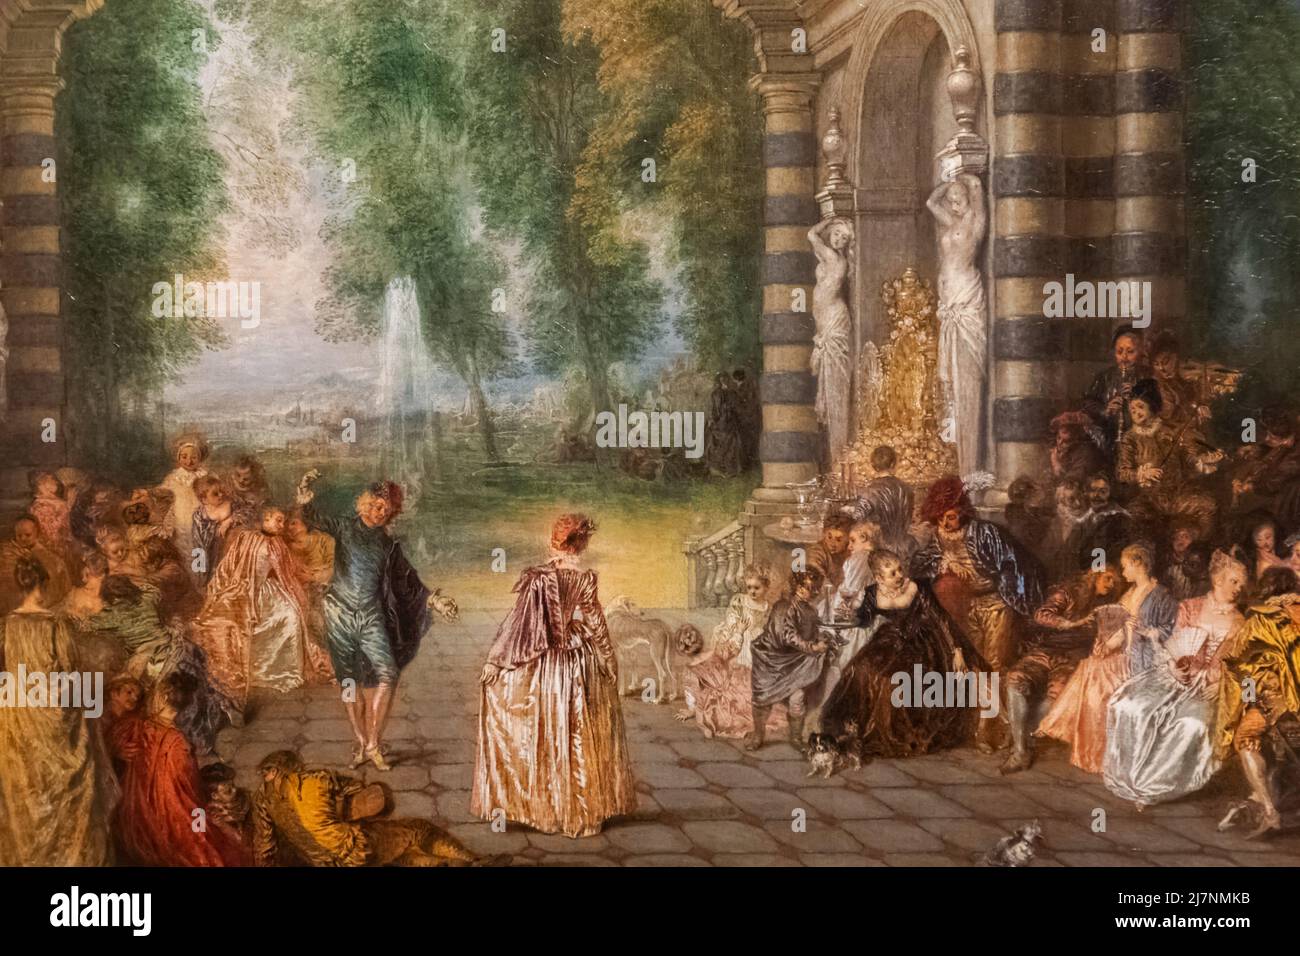 Painting titled 'The Pleasures of the Ball ' (Les Plaisirs du bal) by French Artist Jean-Antoine Watteau dated 1715 Stock Photo